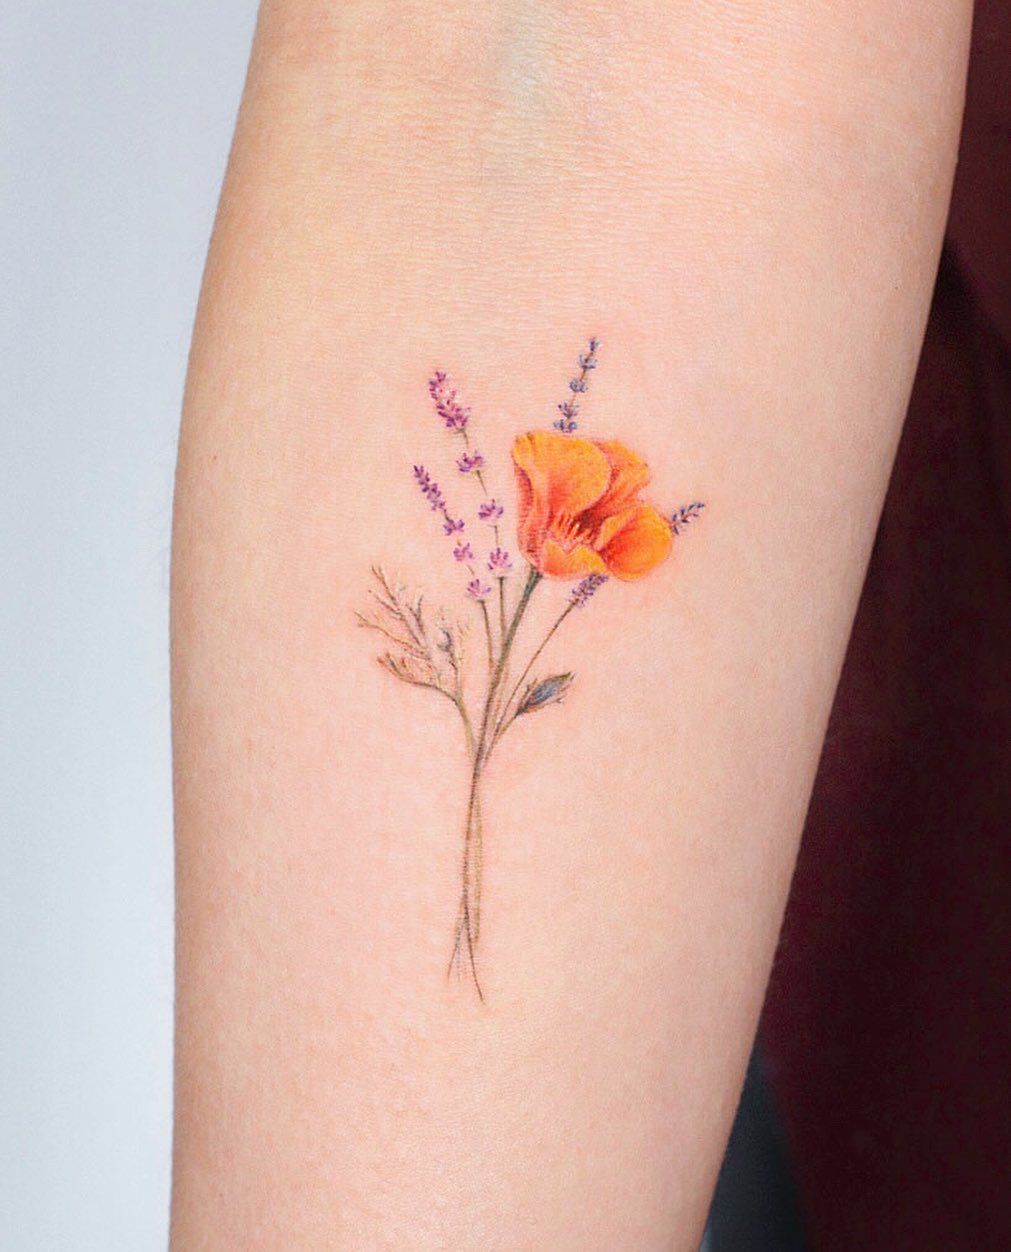 Buy Poppy Flower Temporary Tattoos Nature Tattoos Set of 2 Online in India   Etsy